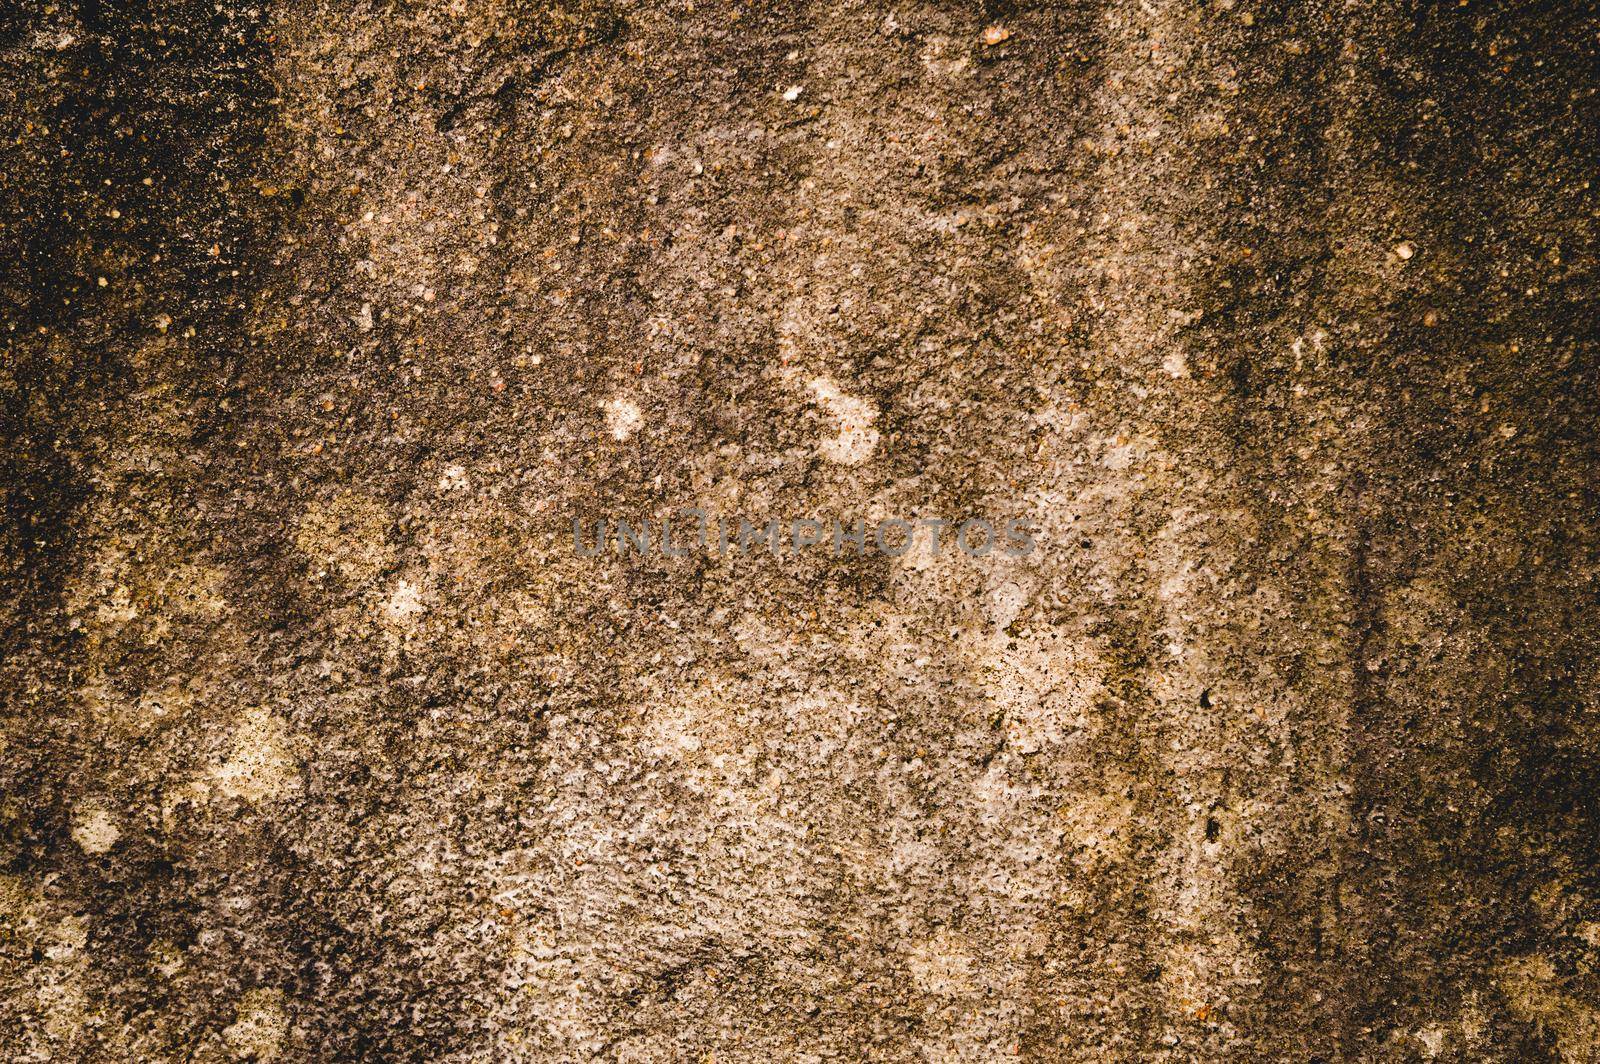 Moist Damp patch on Sand wall due to Rain penetration. Grunge crack moist concrete sand wall texture Pattern Background design element. Close up. Natural grungy color shade with minor uneven cracks. Sandy effects on building exterior plaster pillar. by sudiptabhowmick